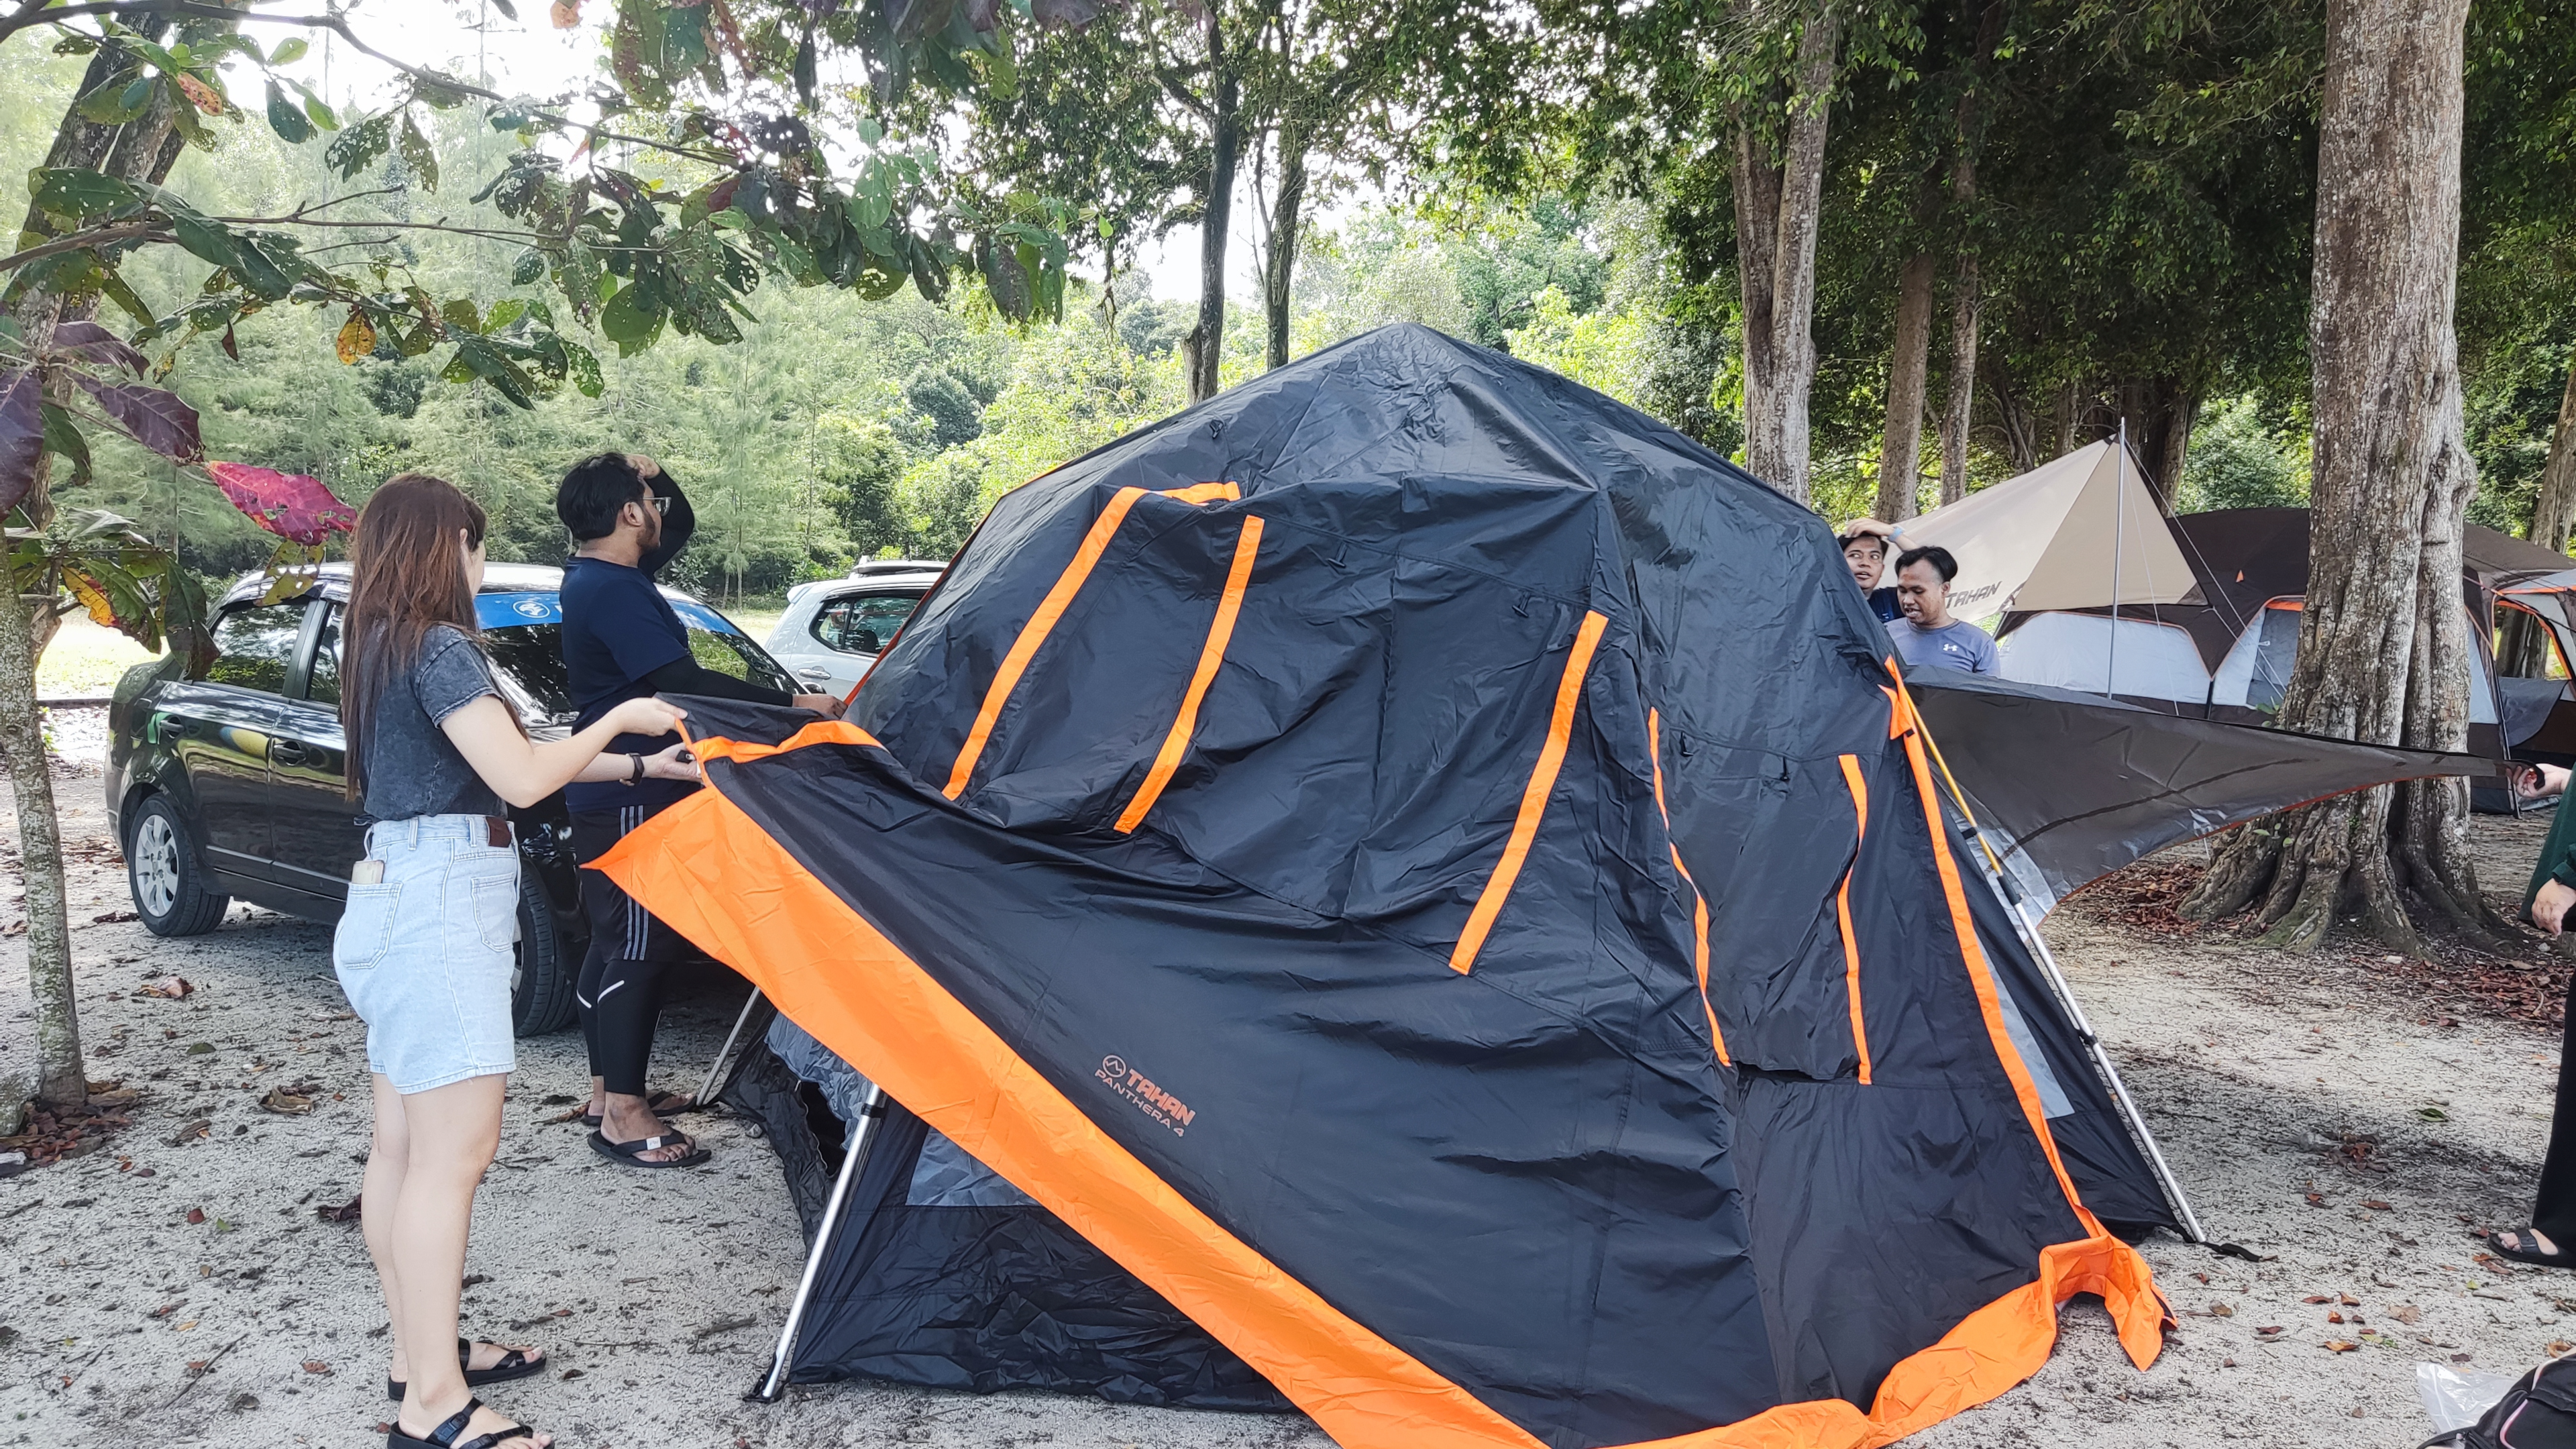 A group of people enjoying camping in Malaysia's diverse camping sites